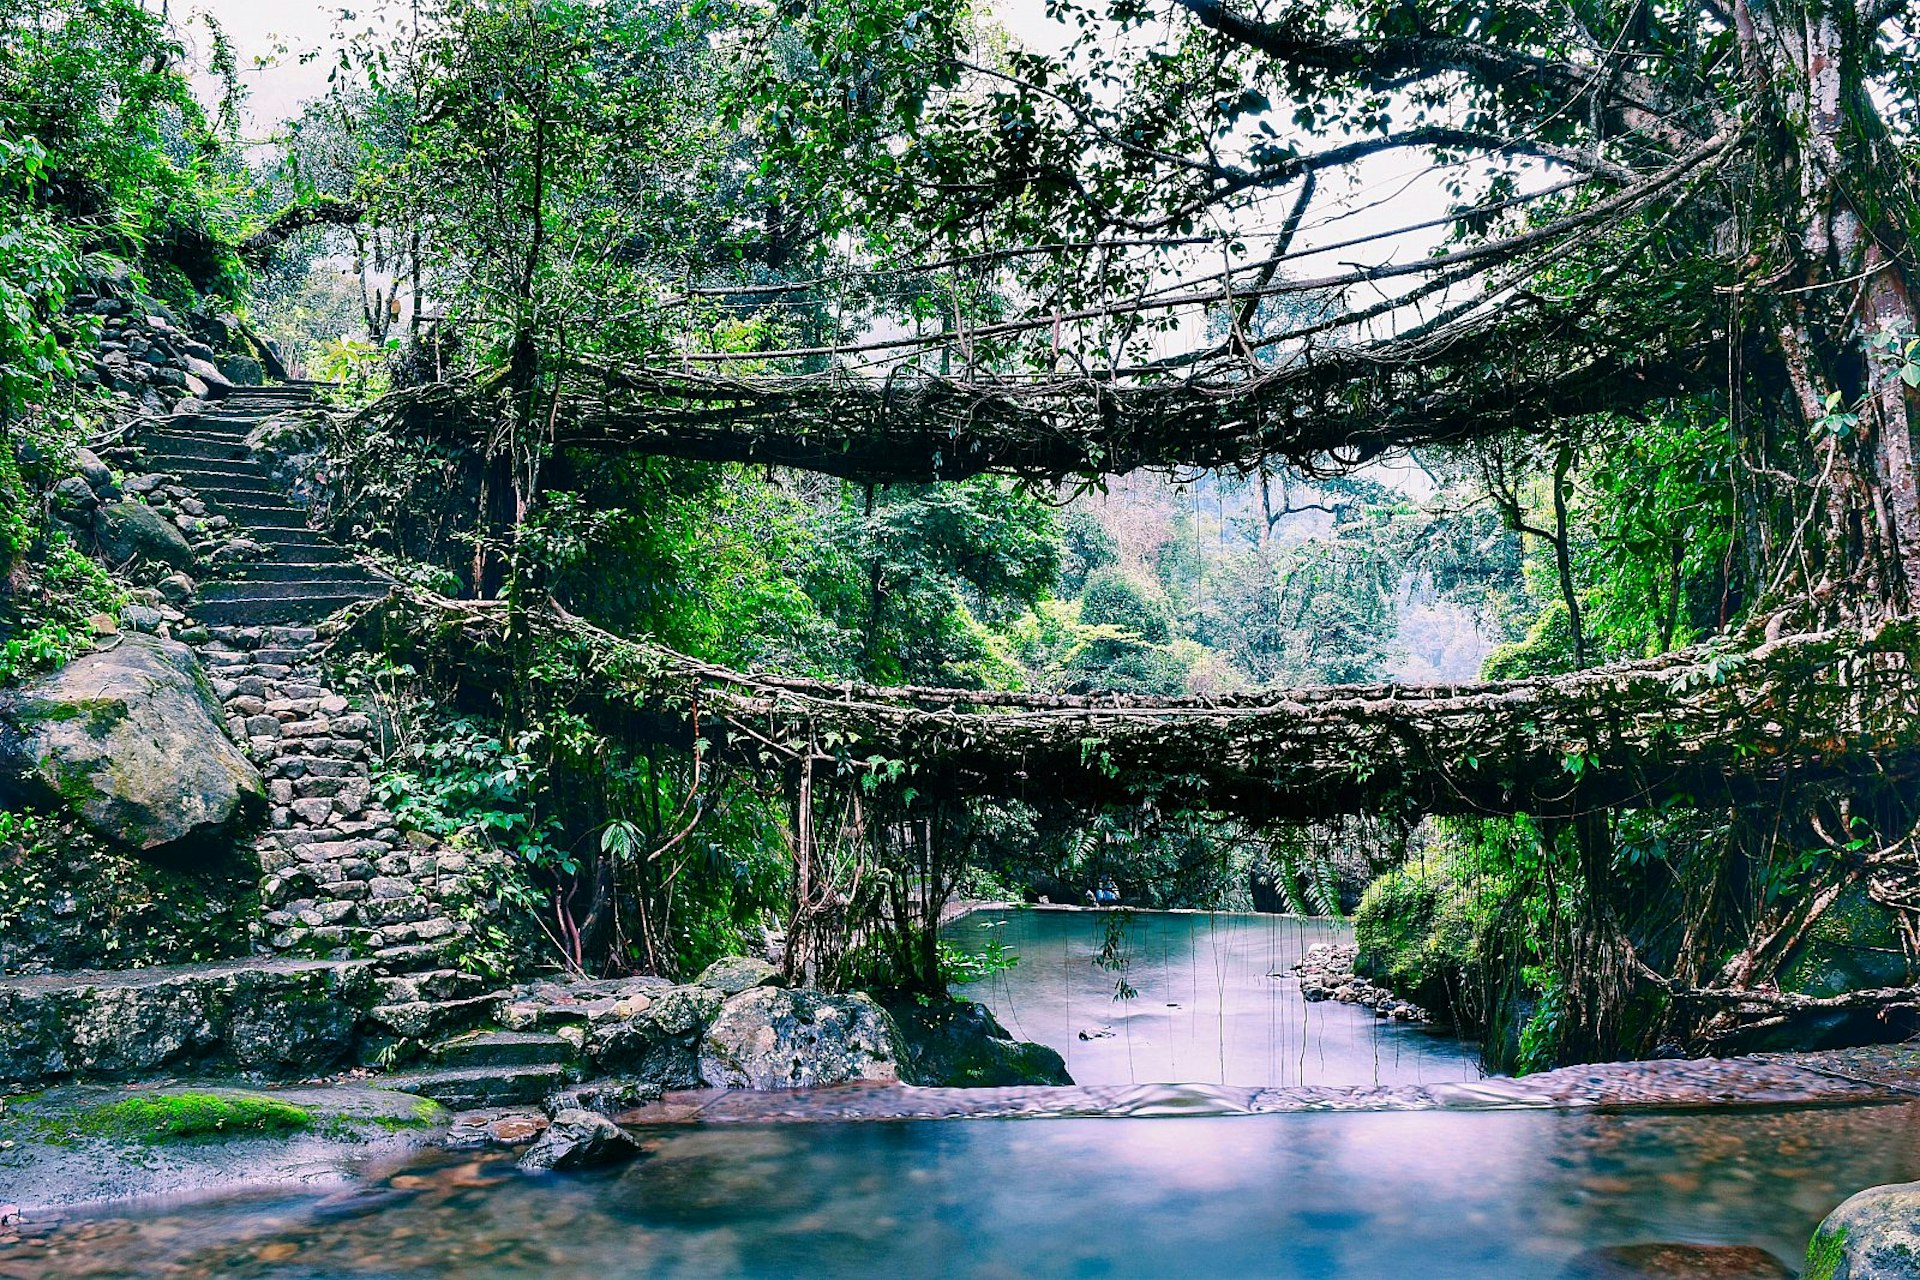 Bridges made from tree roots straddle a river flanked on both sides by trees and on one side by stone steps.